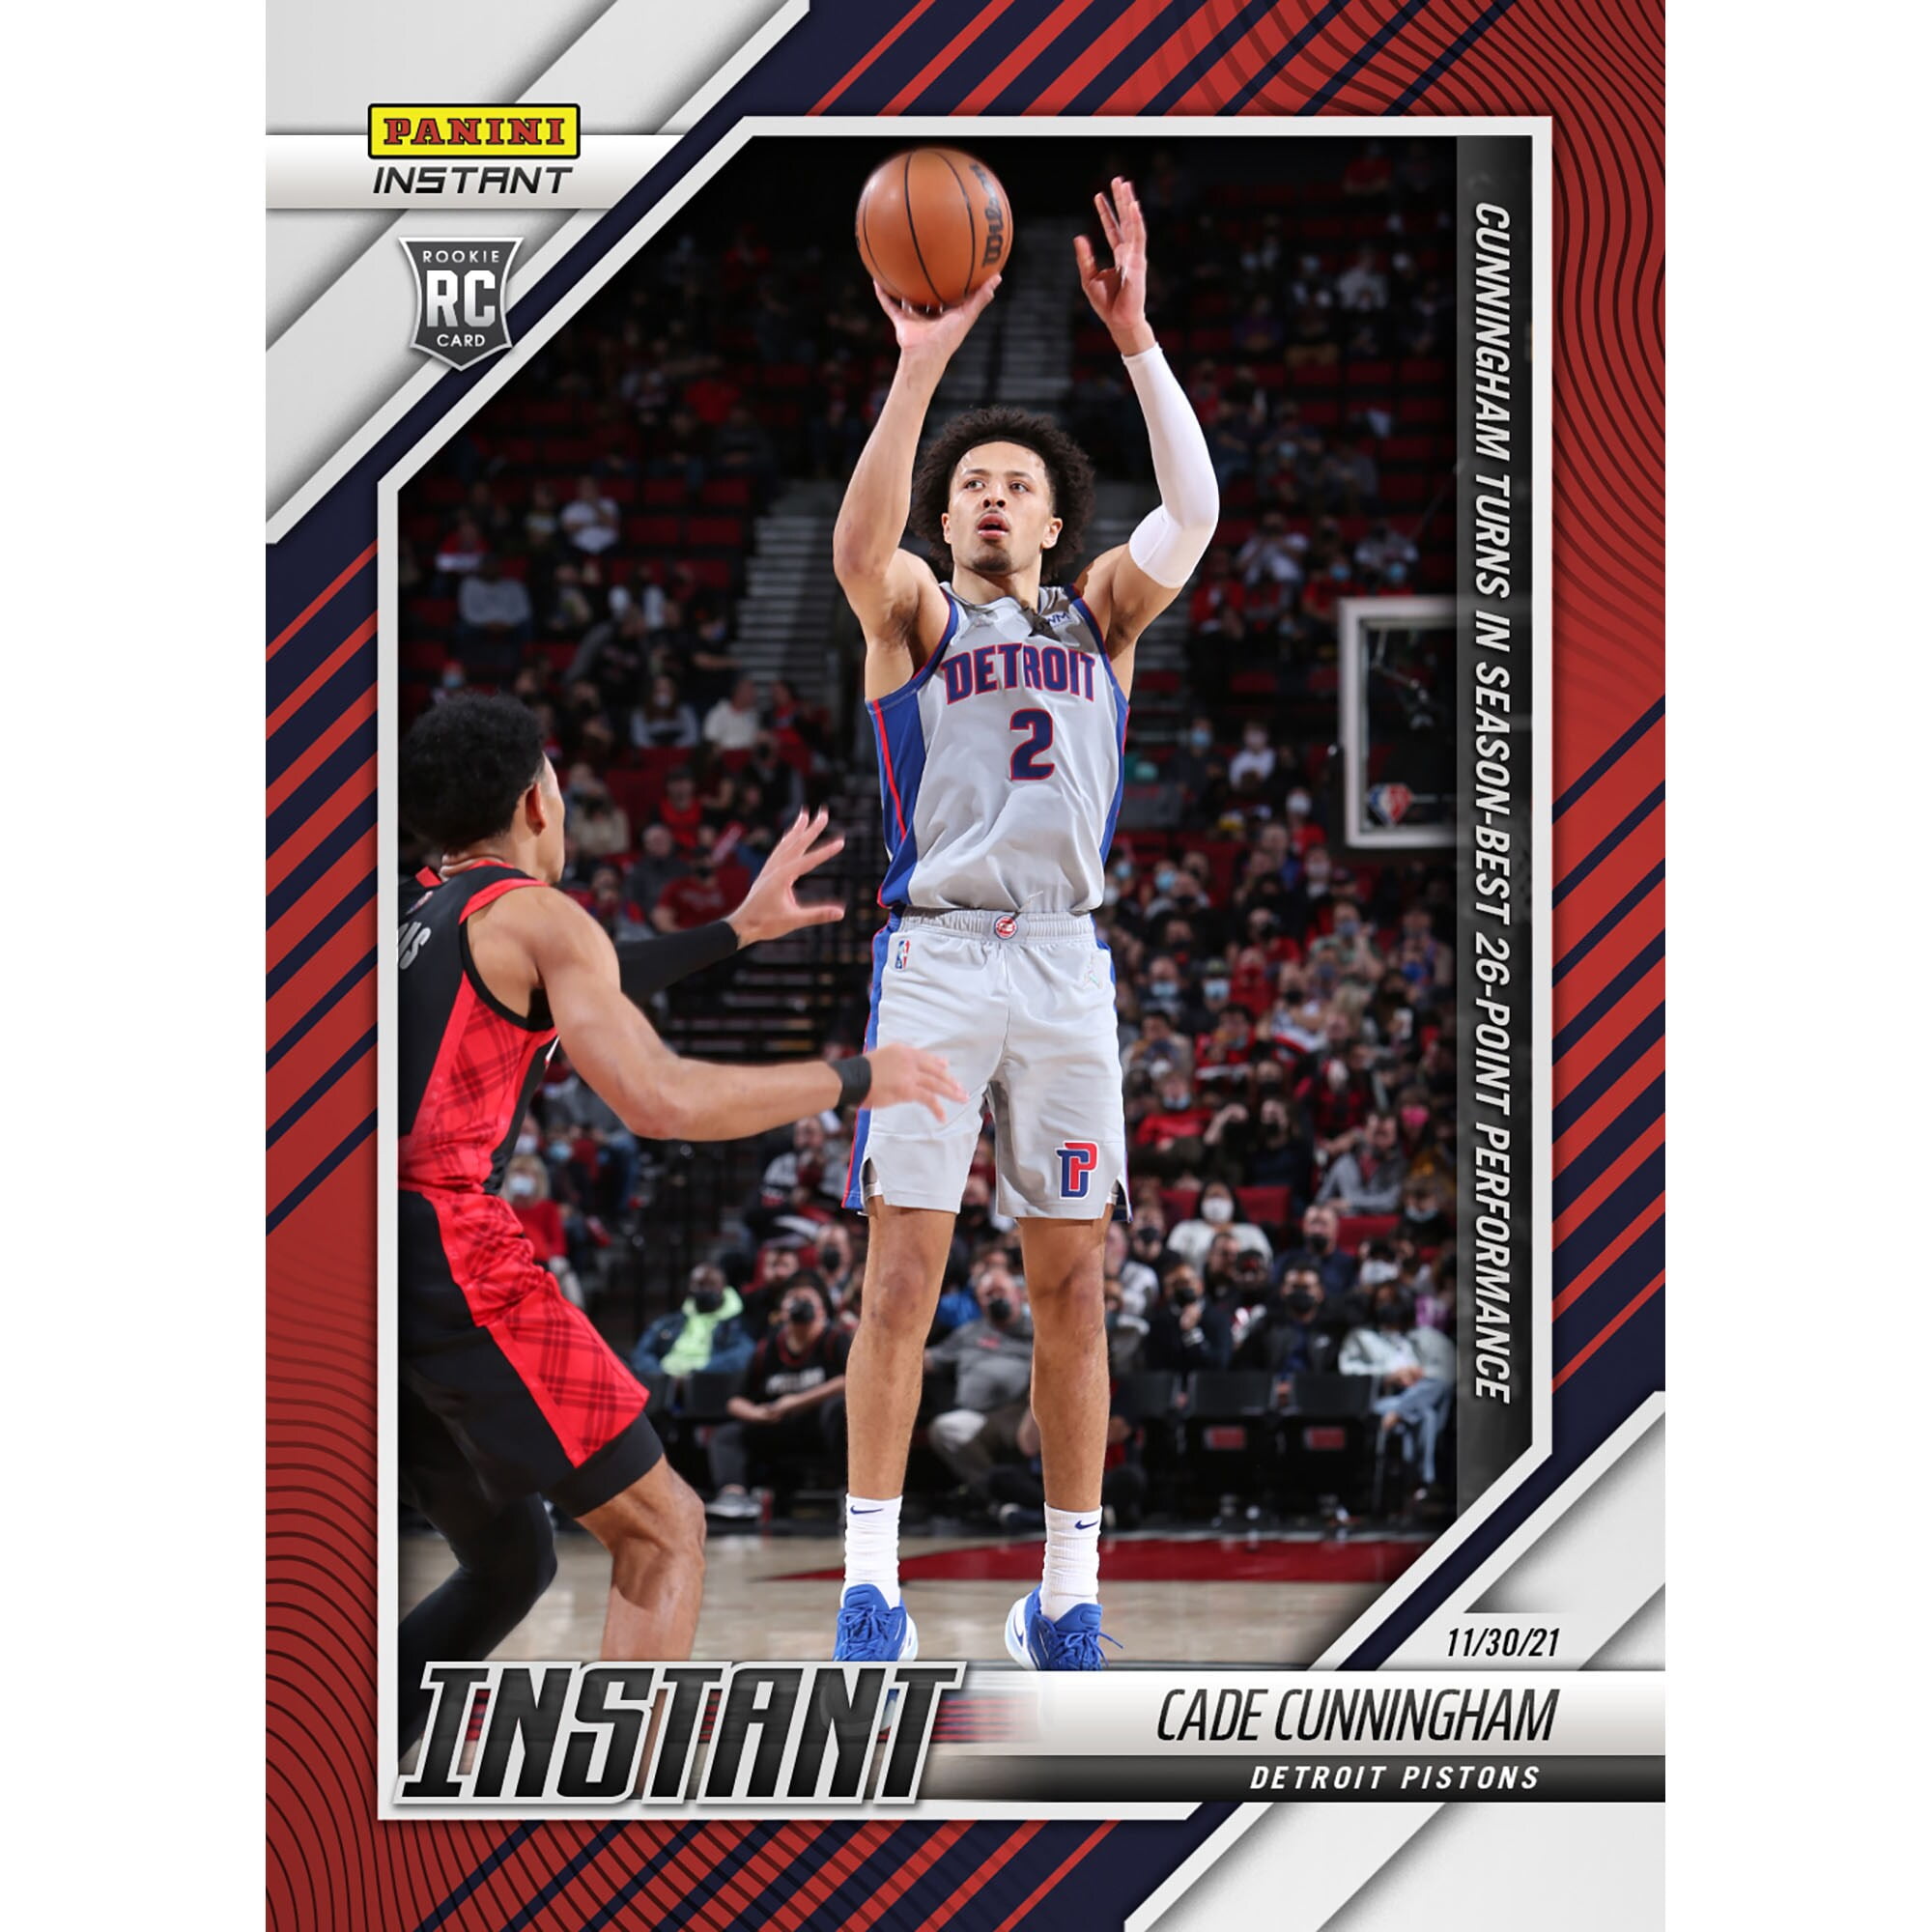 Trae Young Atlanta Hawks Fanatics Exclusive Parallel Panini Instant Young Pours in A Career-Best 56 Points Single Trading Card - Limited Edition of 99